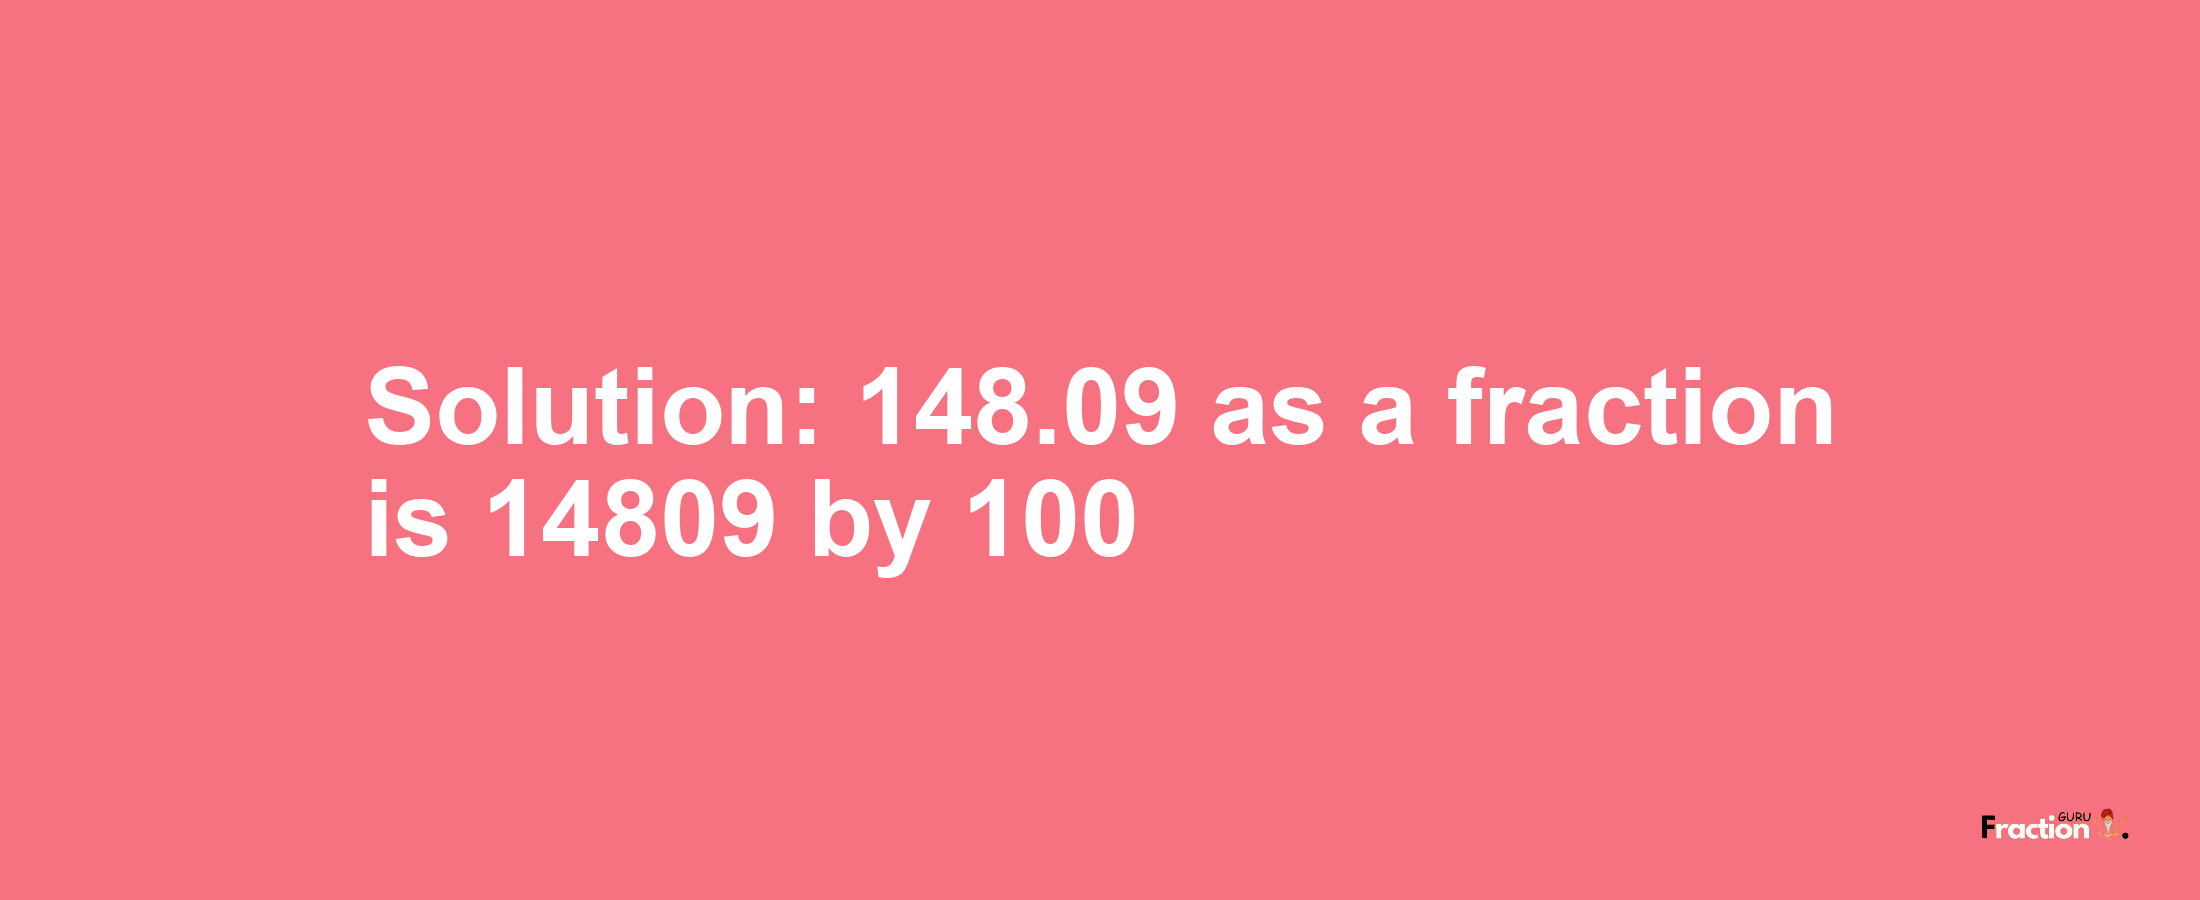 Solution:148.09 as a fraction is 14809/100